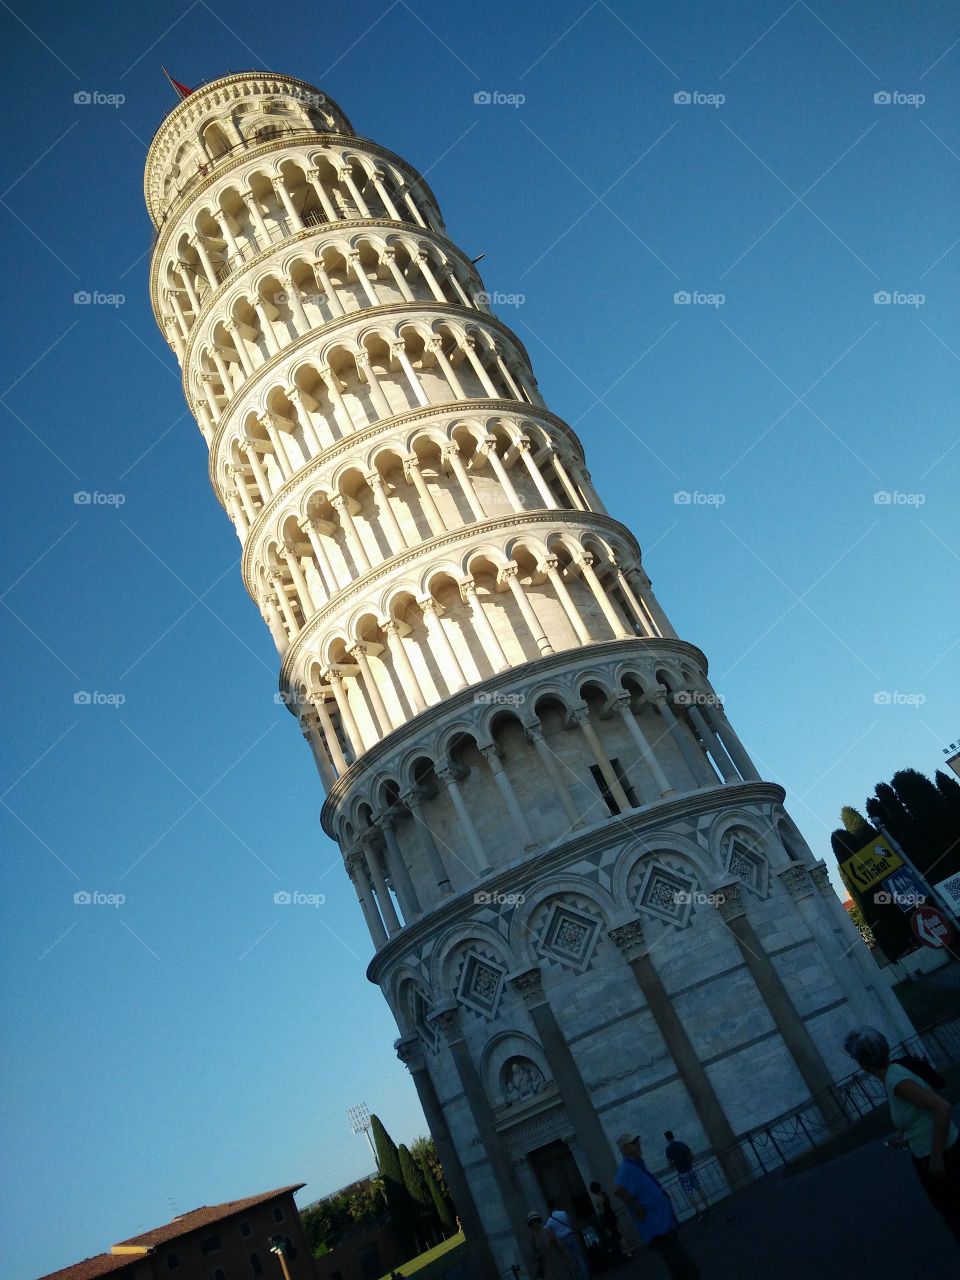 Tower of Pisa. One of the most famous tower, the inclined one of Pisa. Italian'art.